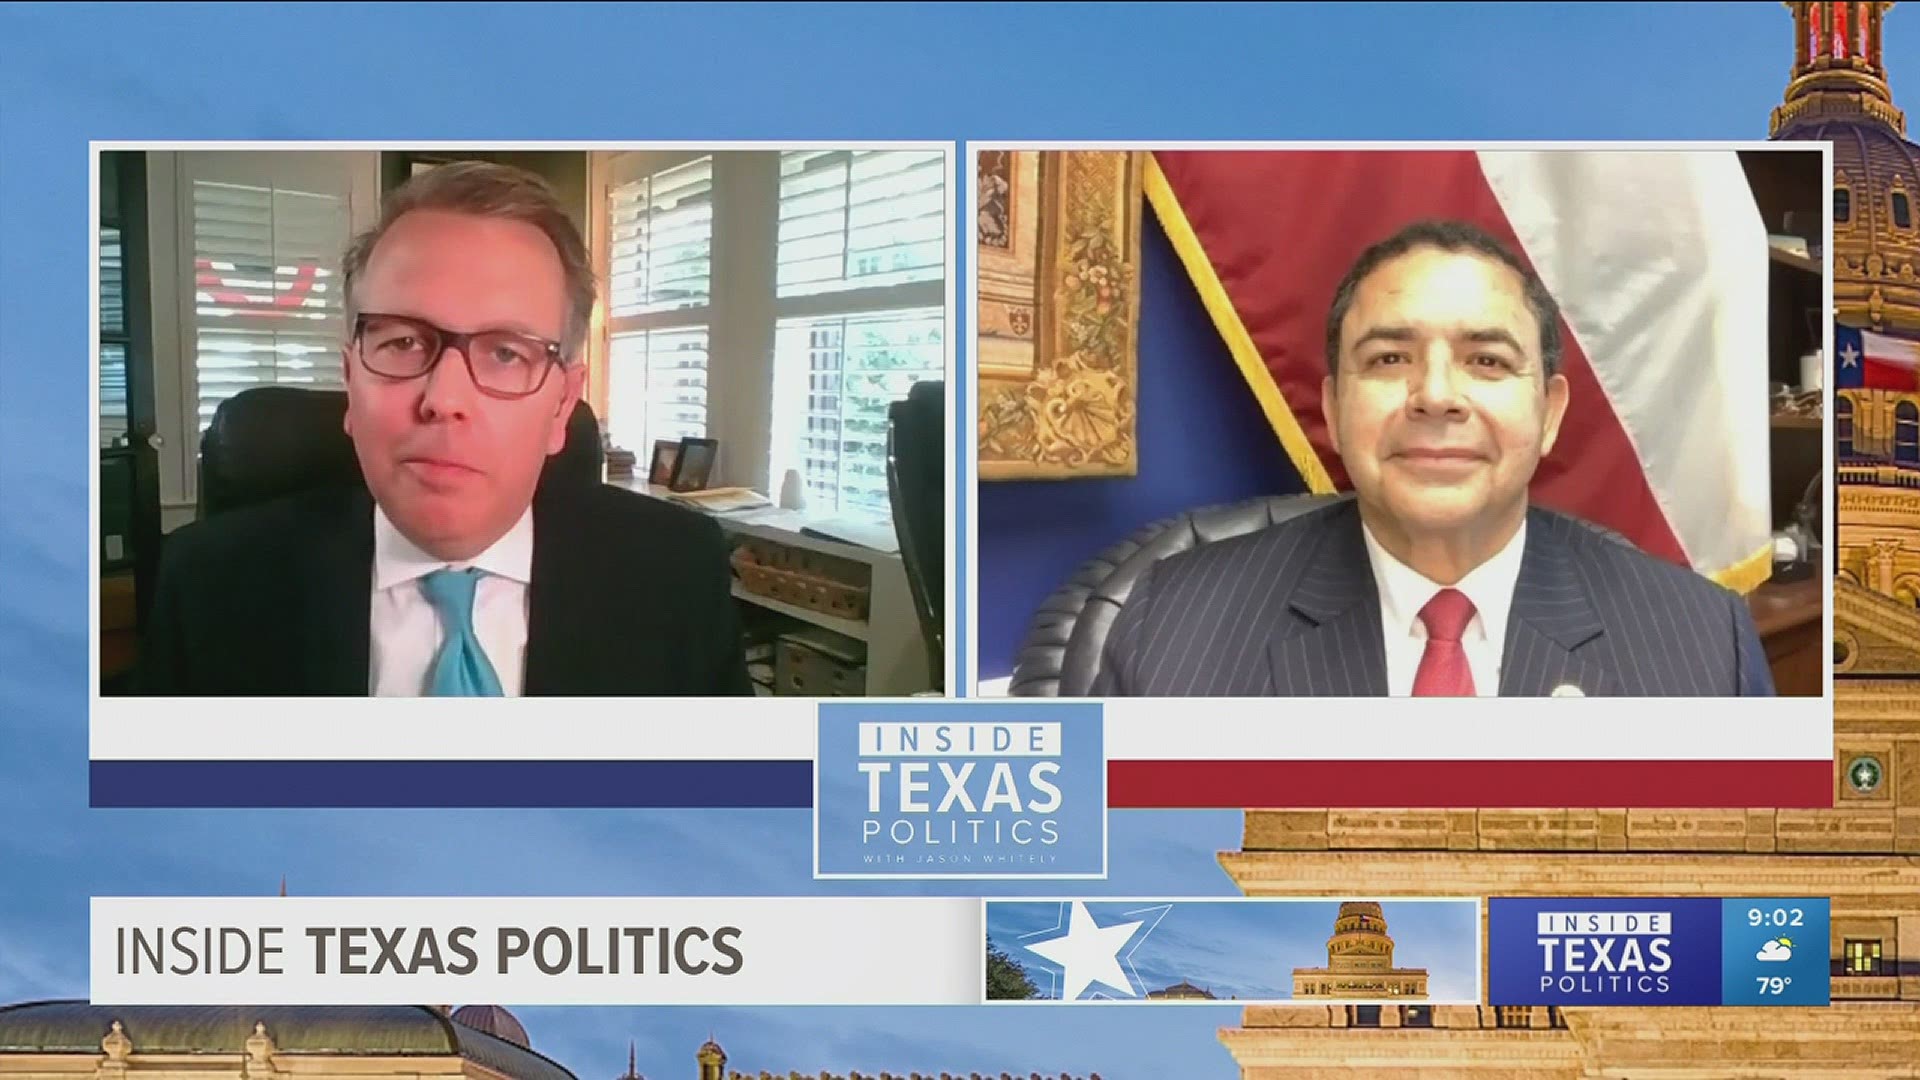 Rep. Henry Cuellar also questioned Gov. Greg Abbott's plan to build a border wall in Texas.